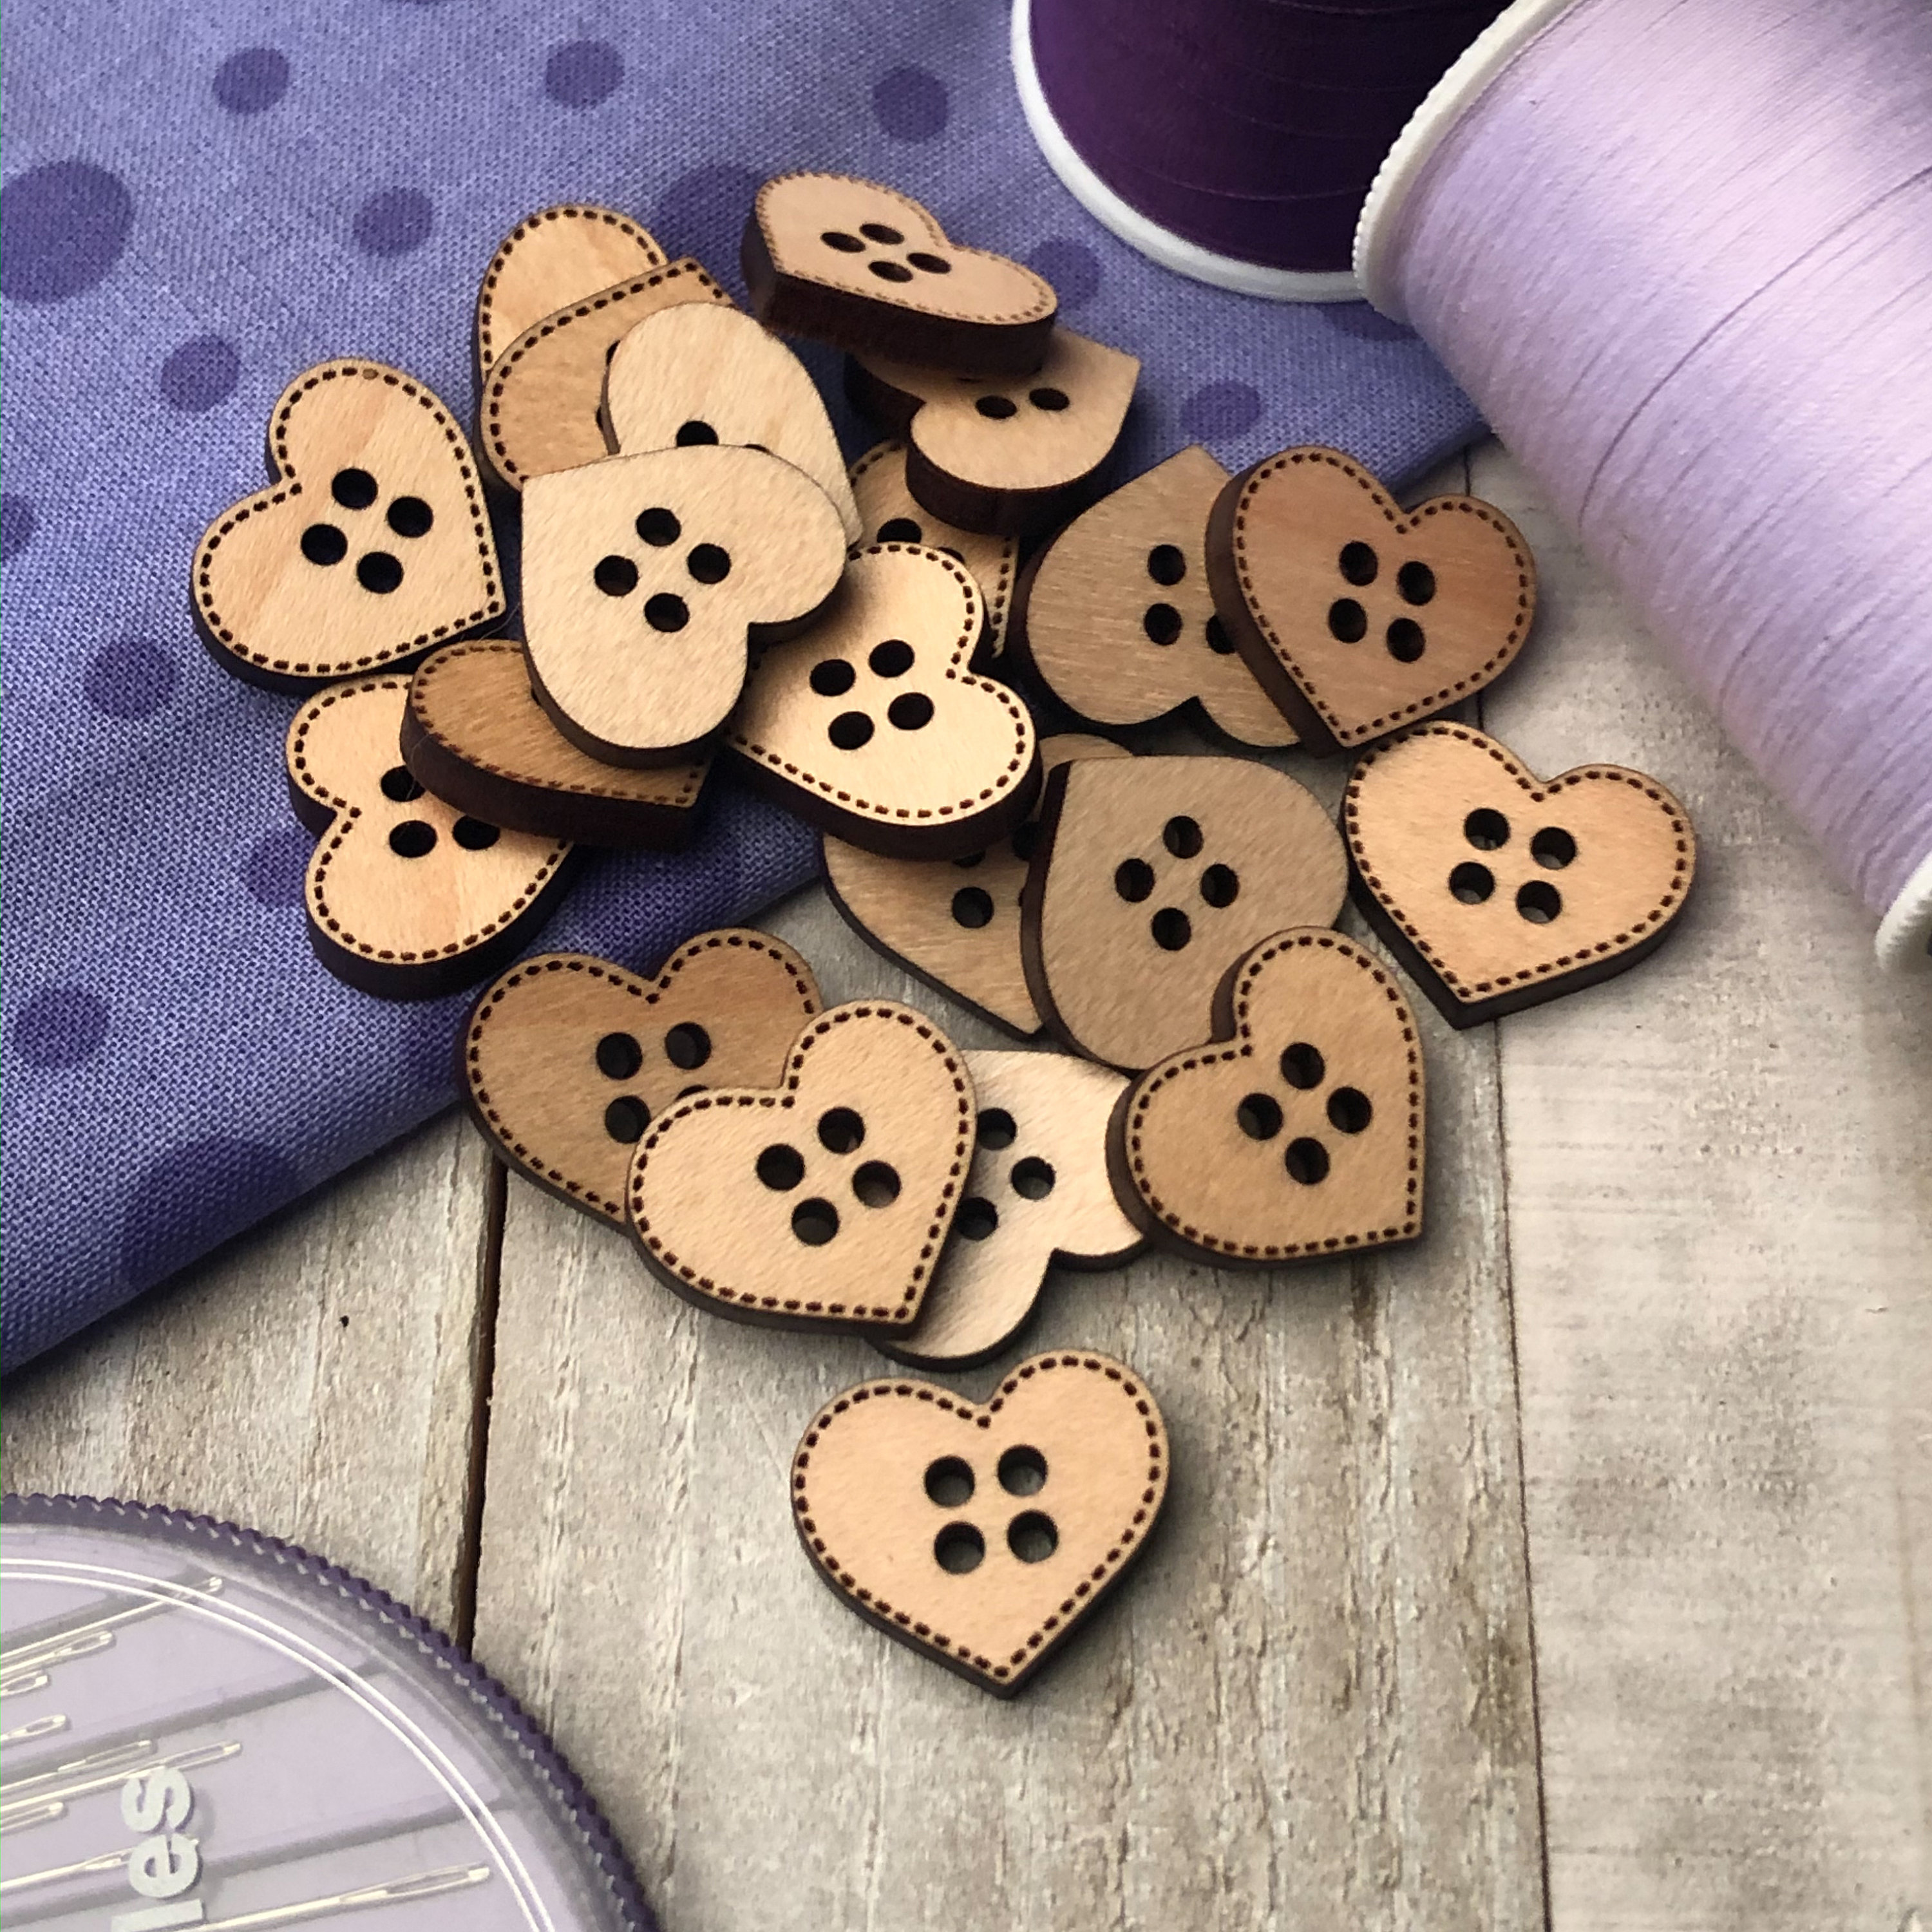  VILLCASE Pack Flower Wood Buttons Upholstery Buttons Flower  Buttons for Crafts Buttons Scrabooking Wood Craft Button Heart Buttons  Sewing DIY Craft Button Bamboo Decorate Heart-Shaped